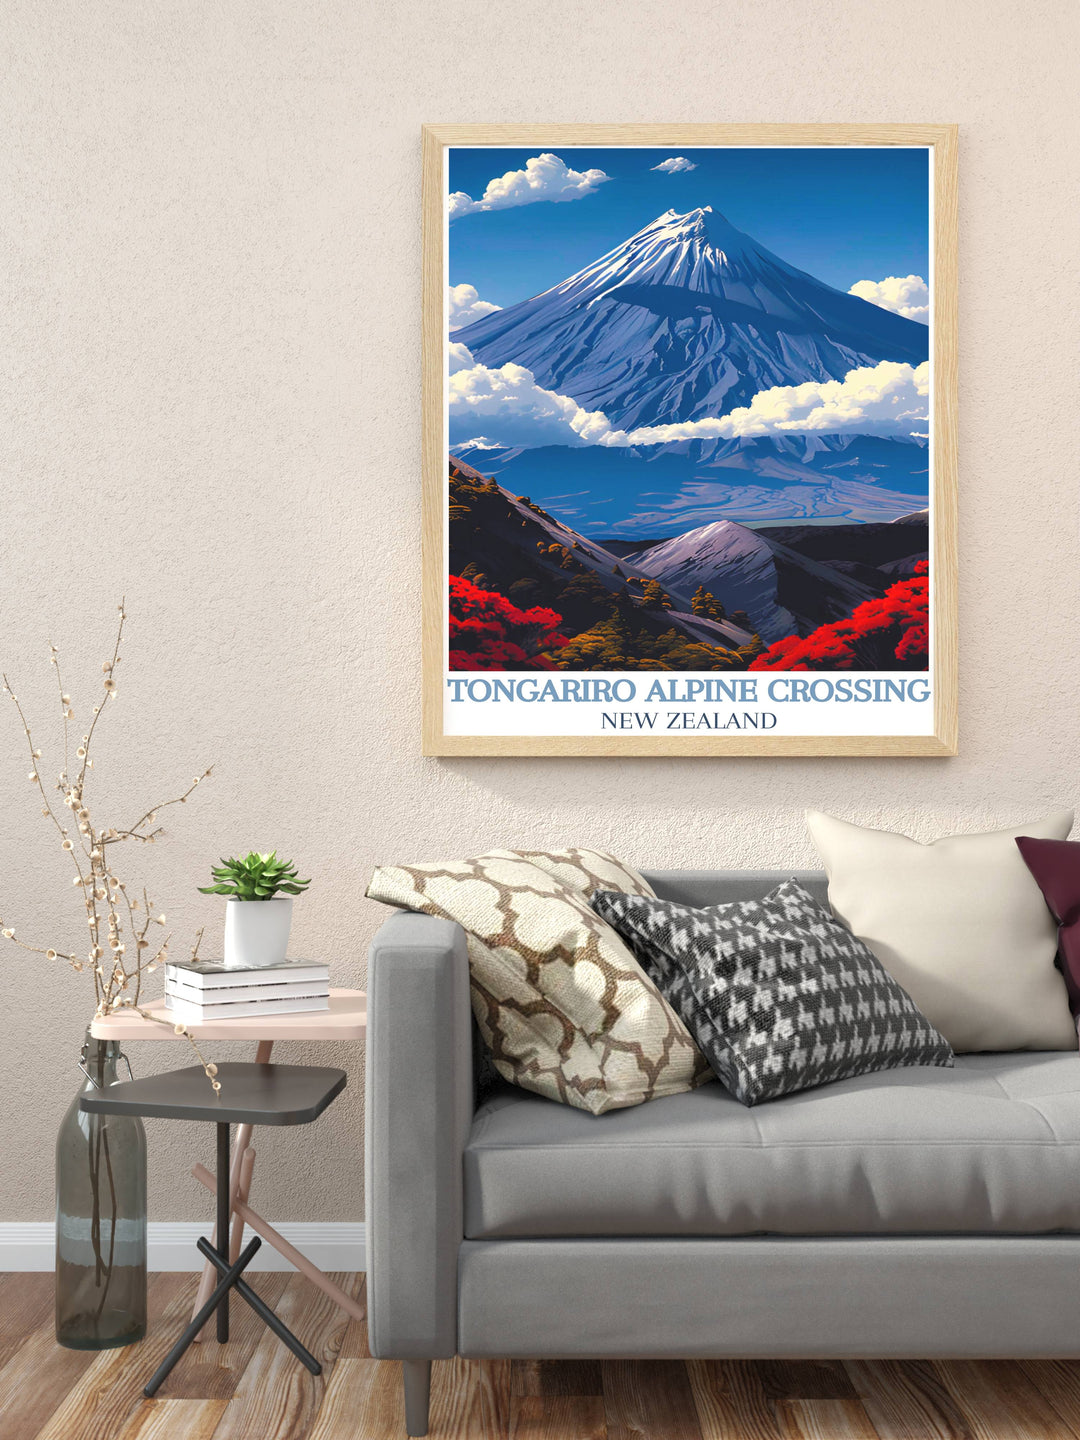 Tongariro Alpine Crossing gallery wall art showcasing the dramatic views and challenging terrain of one of New Zealands most famous trails, ideal for nature enthusiasts and art lovers.